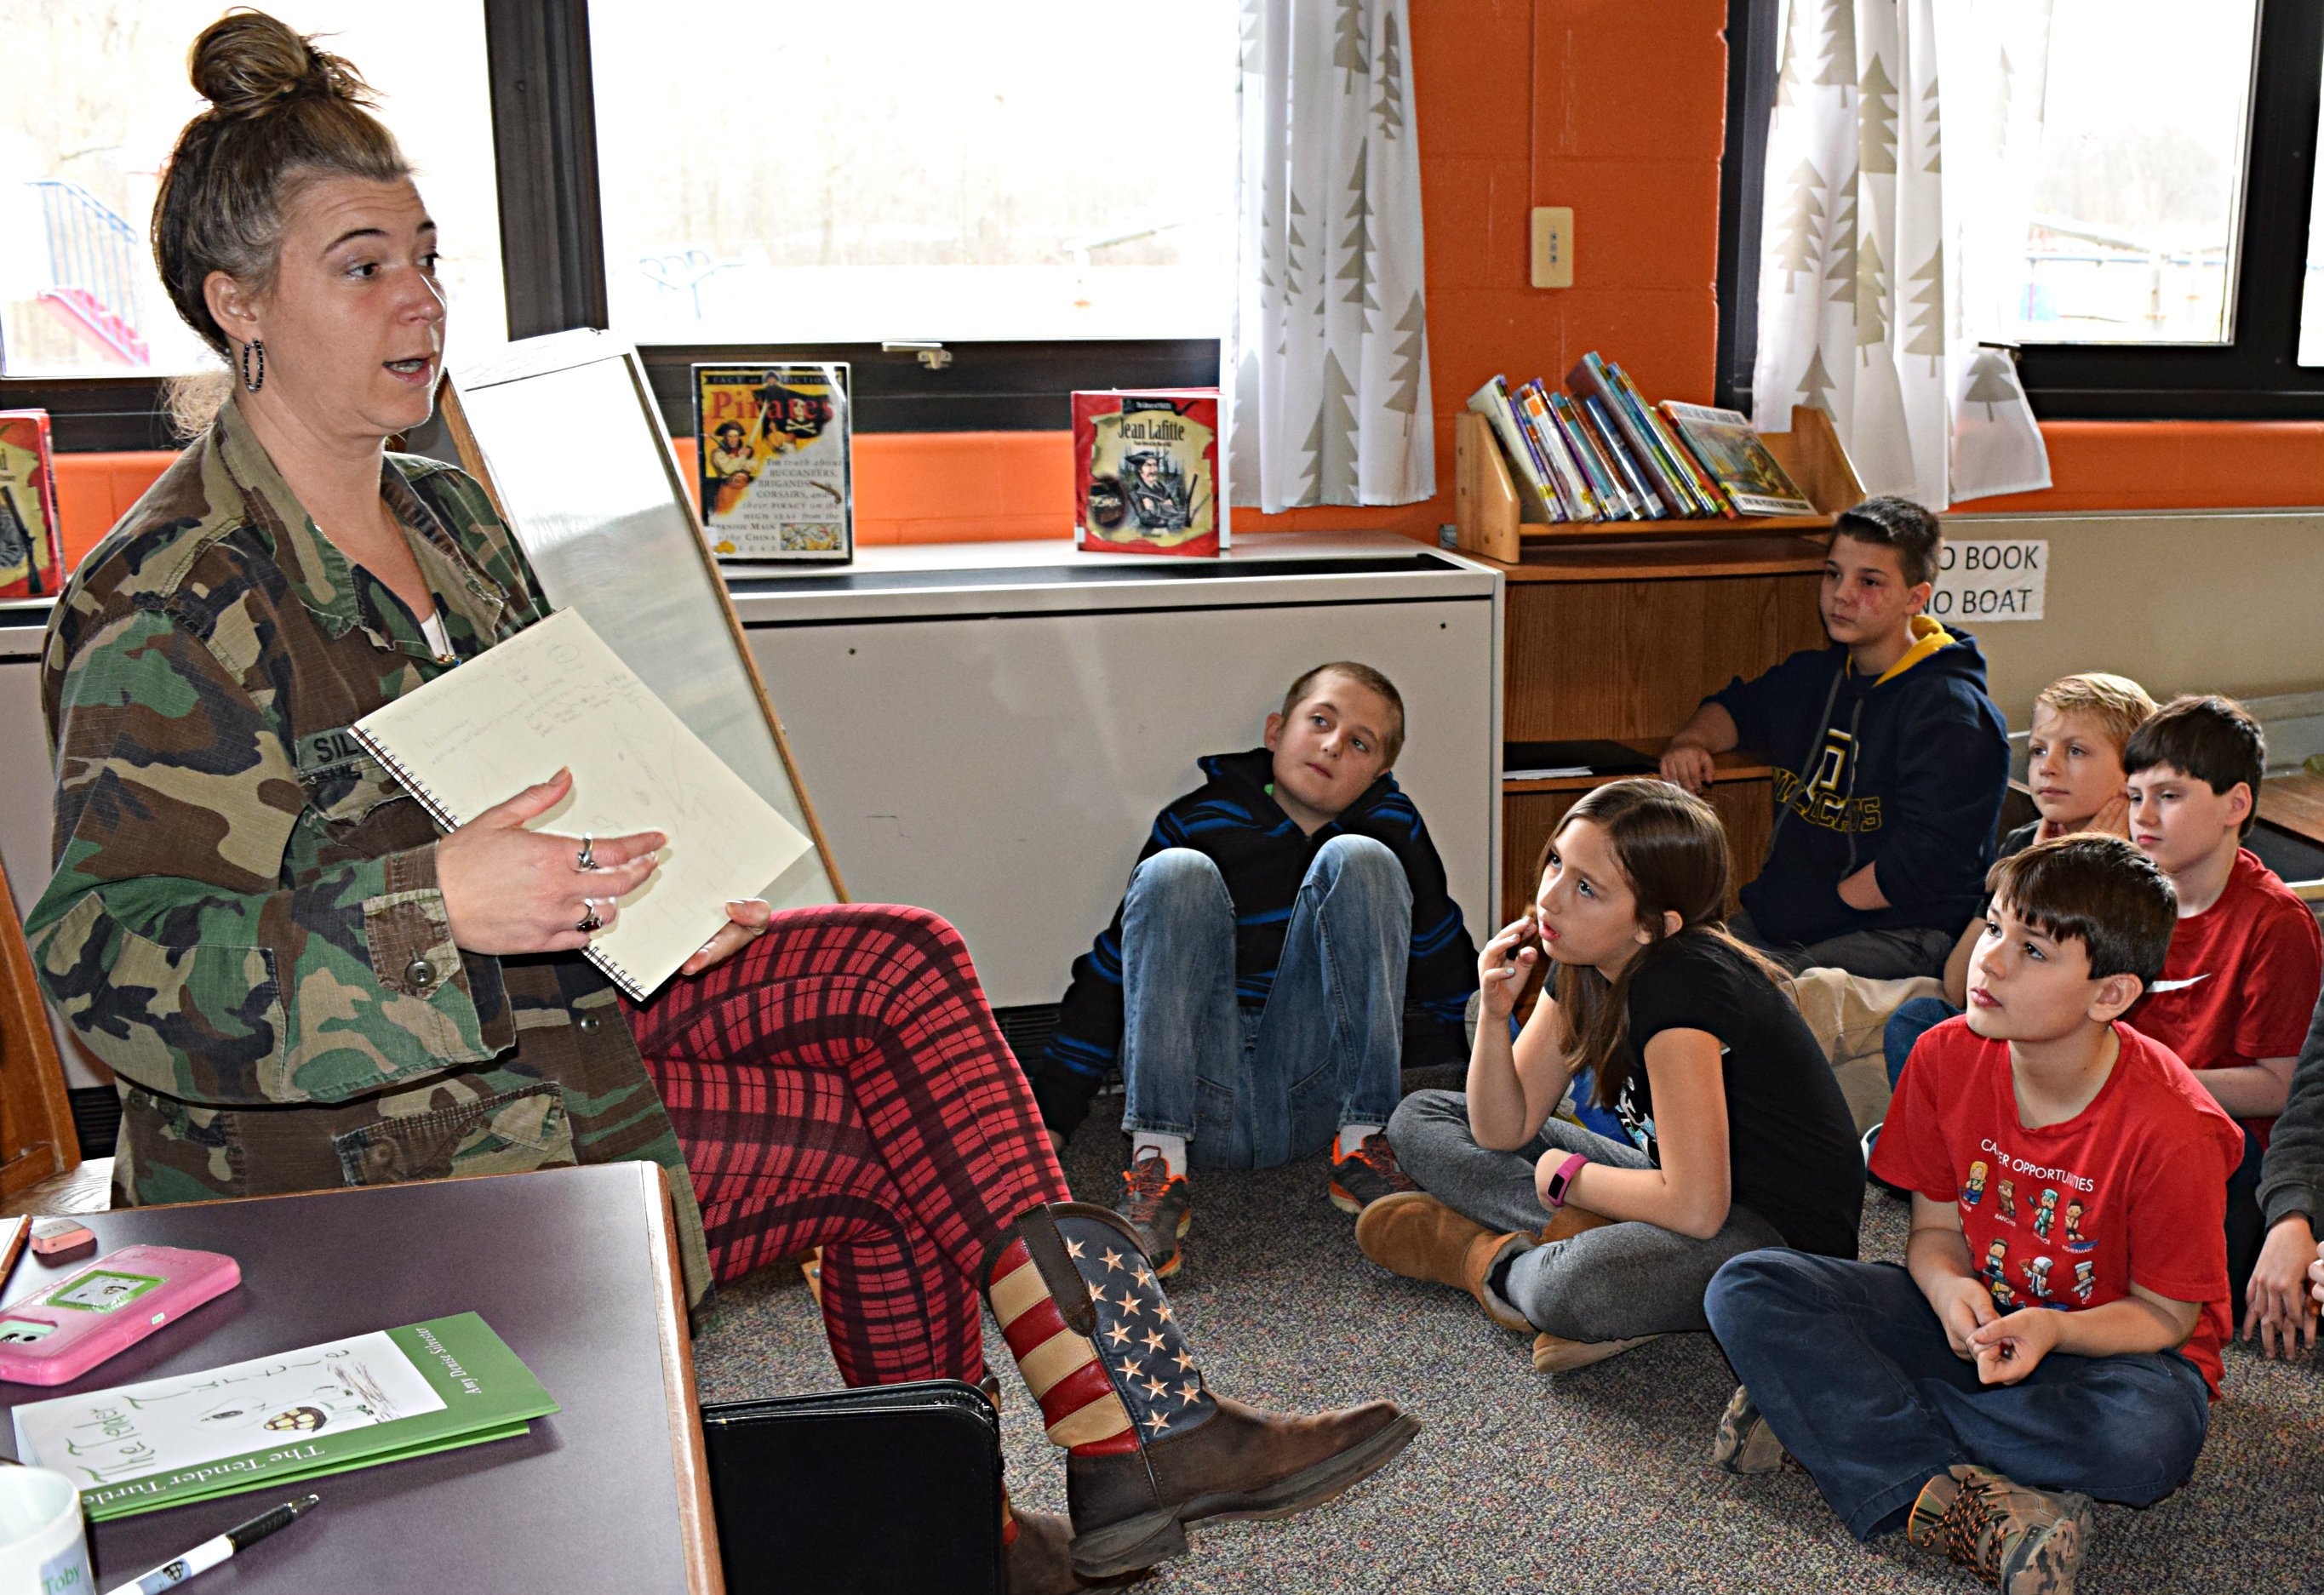 Children’s author/illustrator Amy Silvester (left) discusses story ideas with Leonard Elementary students during her March 24 visit to the school. Photo by Elise Shire.